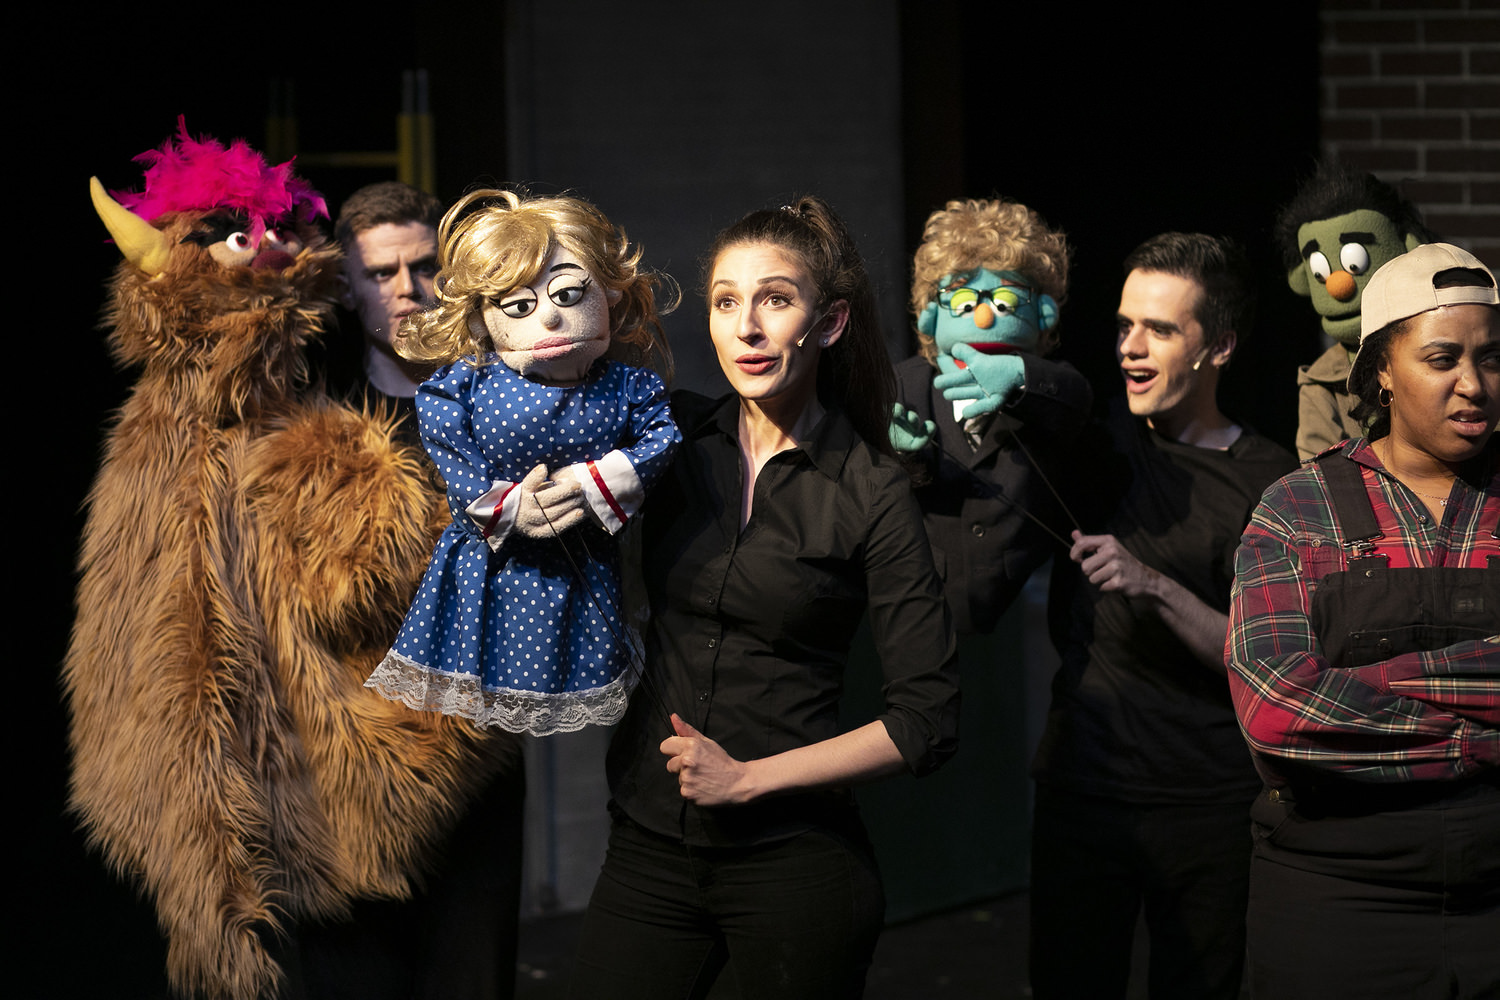 Scenes from the Toto Too production of Avenue Q at The Gladstone Theatre, Ottawa. Photos by Maria Vartanova 2